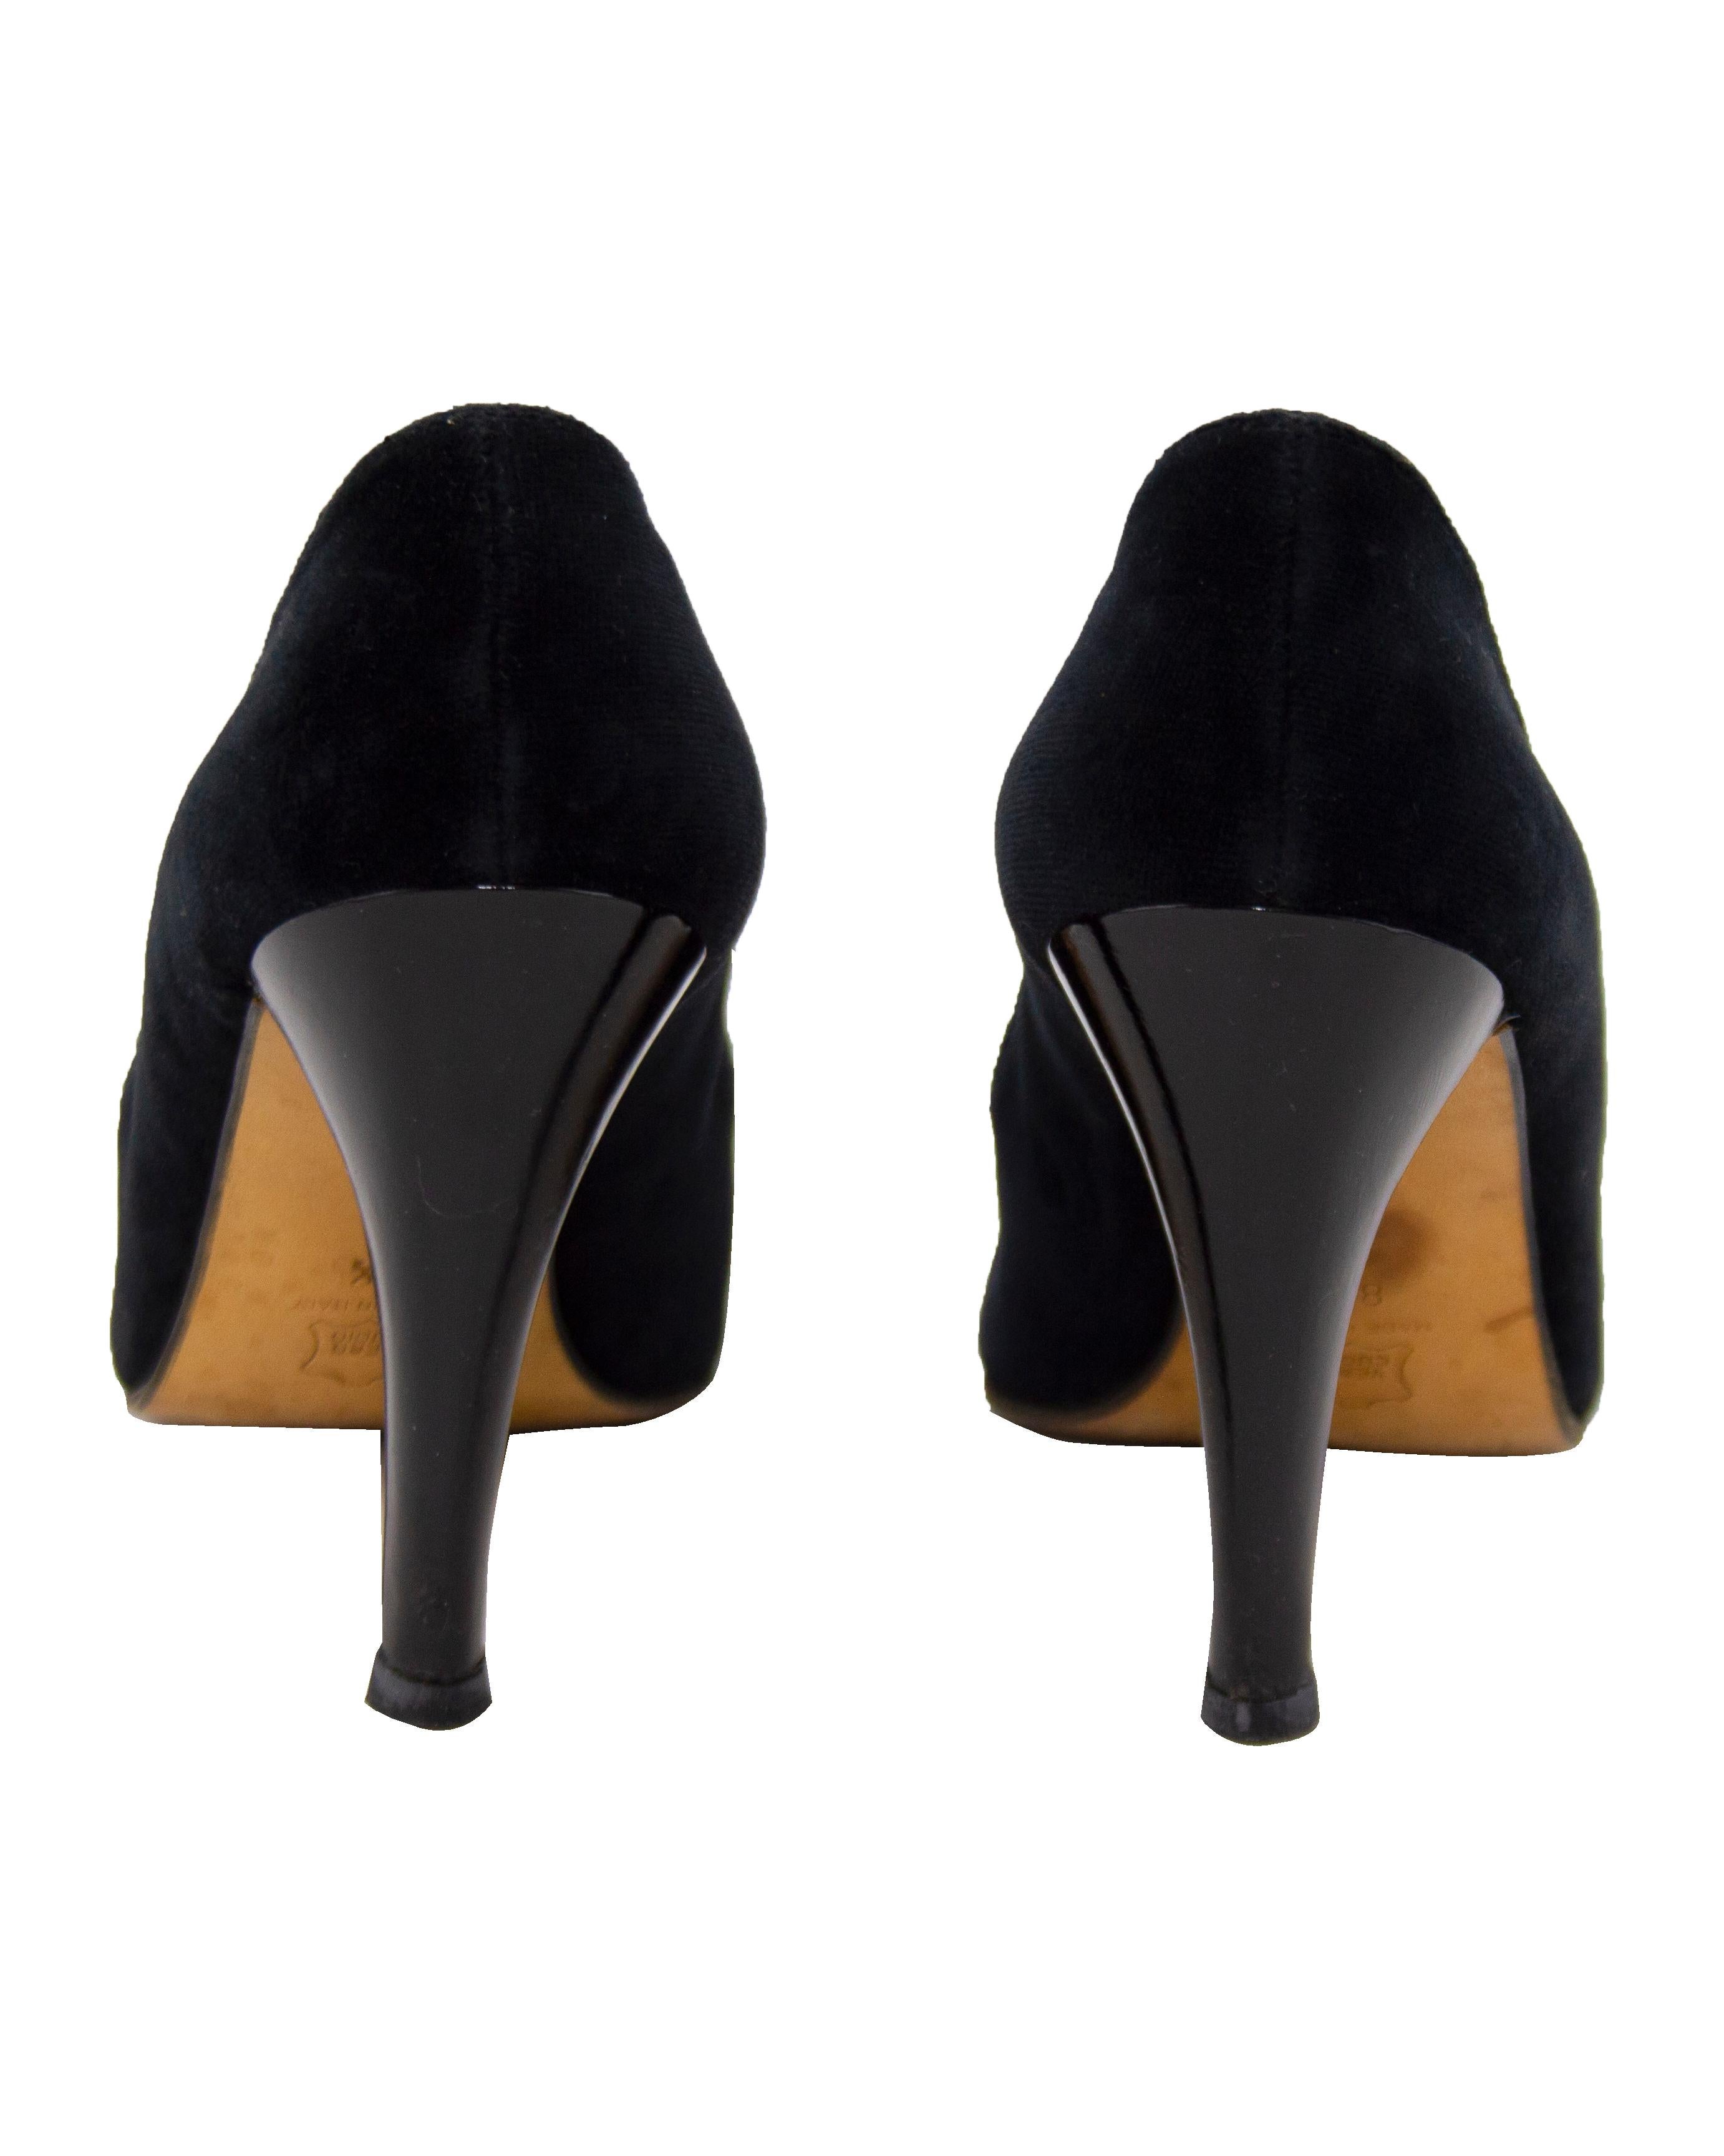 1980s Yves Saint Laurent Black Velvet Pumps with Leather Bow In Good Condition For Sale In Toronto, Ontario